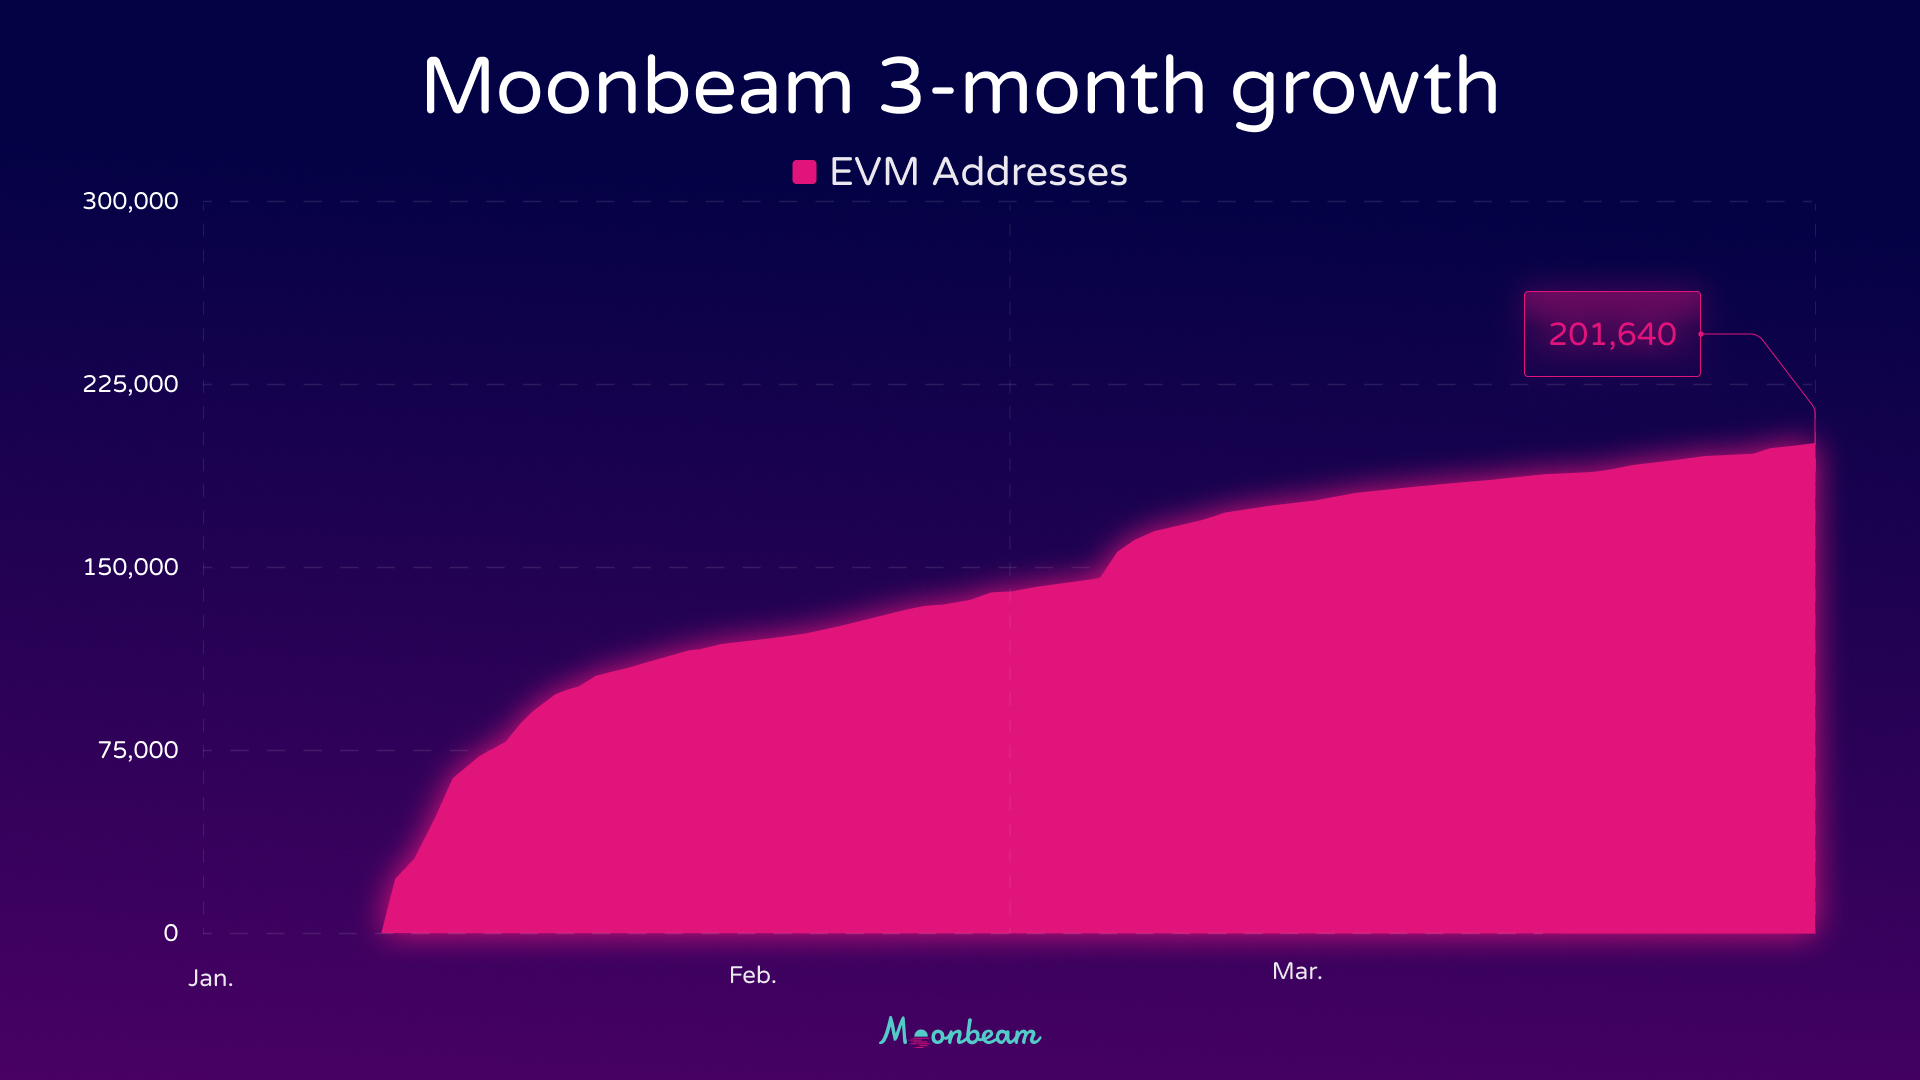 Graph depicting Moonbeam's 3-month growth in EVM Addresses.